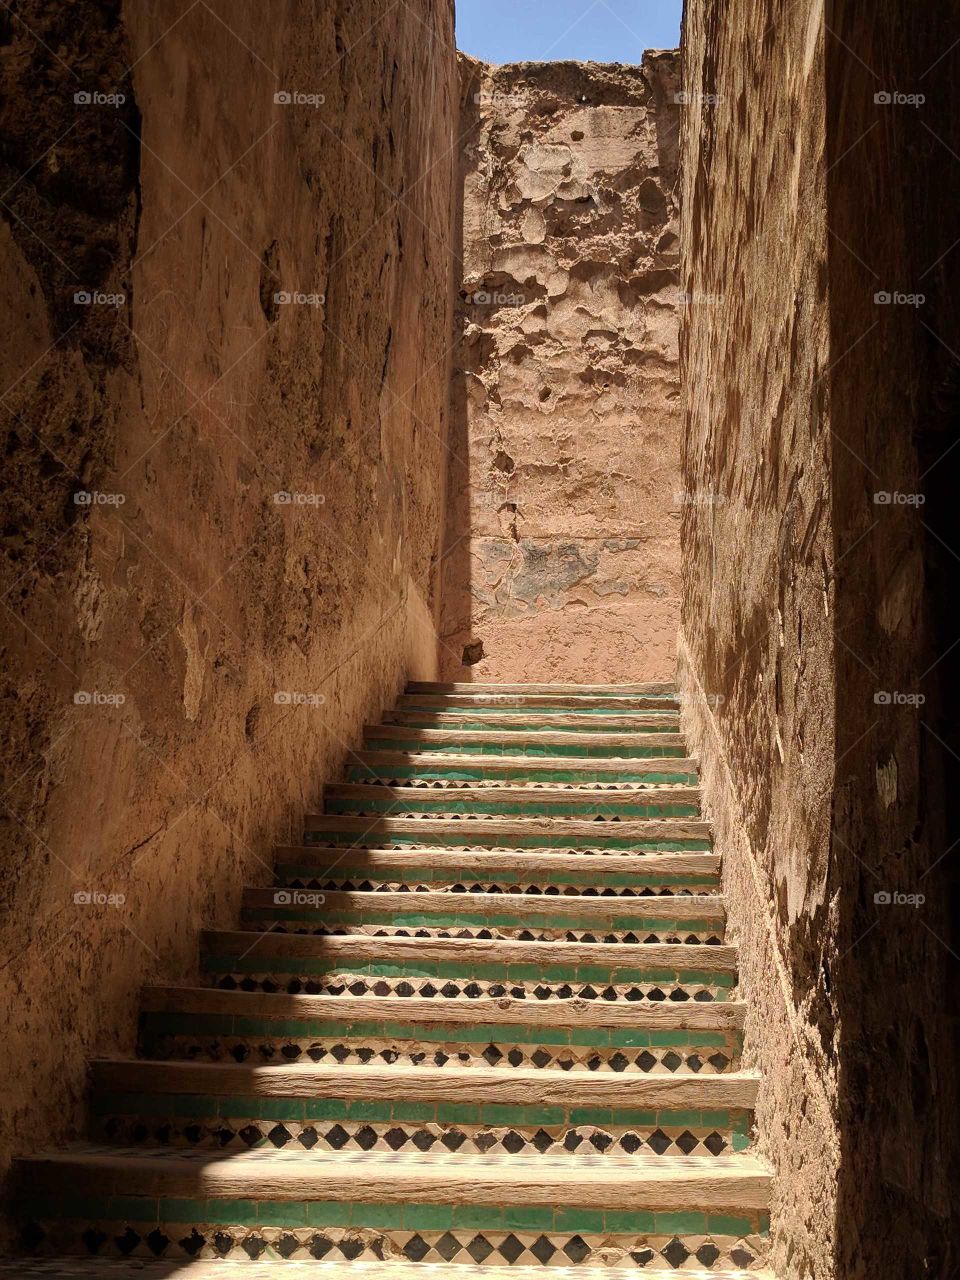 Gorgeous Ceramic Tile Mosaic Staircase Surrounded by Stone Walls and Shadows at the Palais El Badi, an Ancient Palace in Marrakech in Morocco